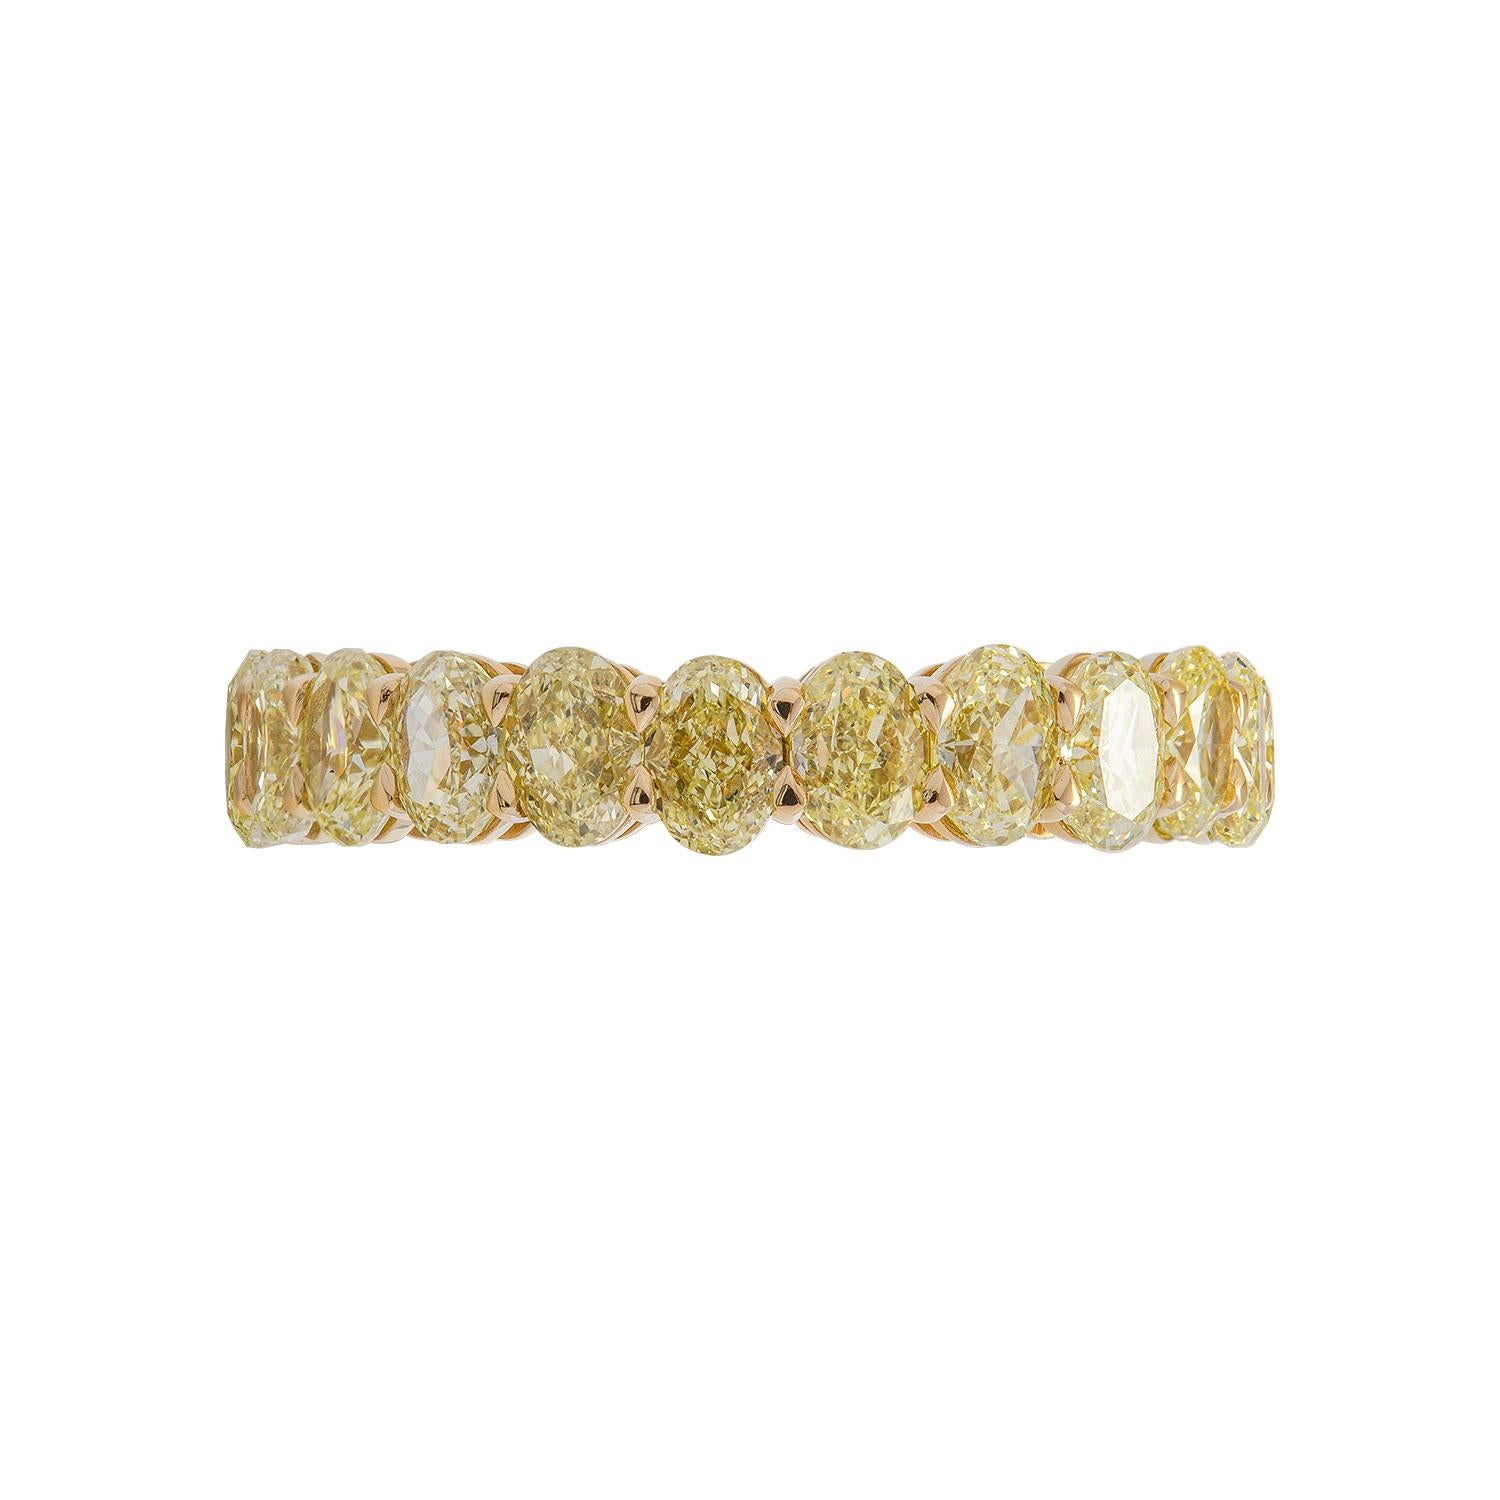 The most wanted piece of jewelry in 2021, timeless, edgy, and stylish!
Handcrafted Band, the highest quality of mounting you will find! Delicate yet sturdy Mounted in 18K Yellow Gold, 22 Oval diamonds totaling 4.94ct total, 0.23-.25ct each